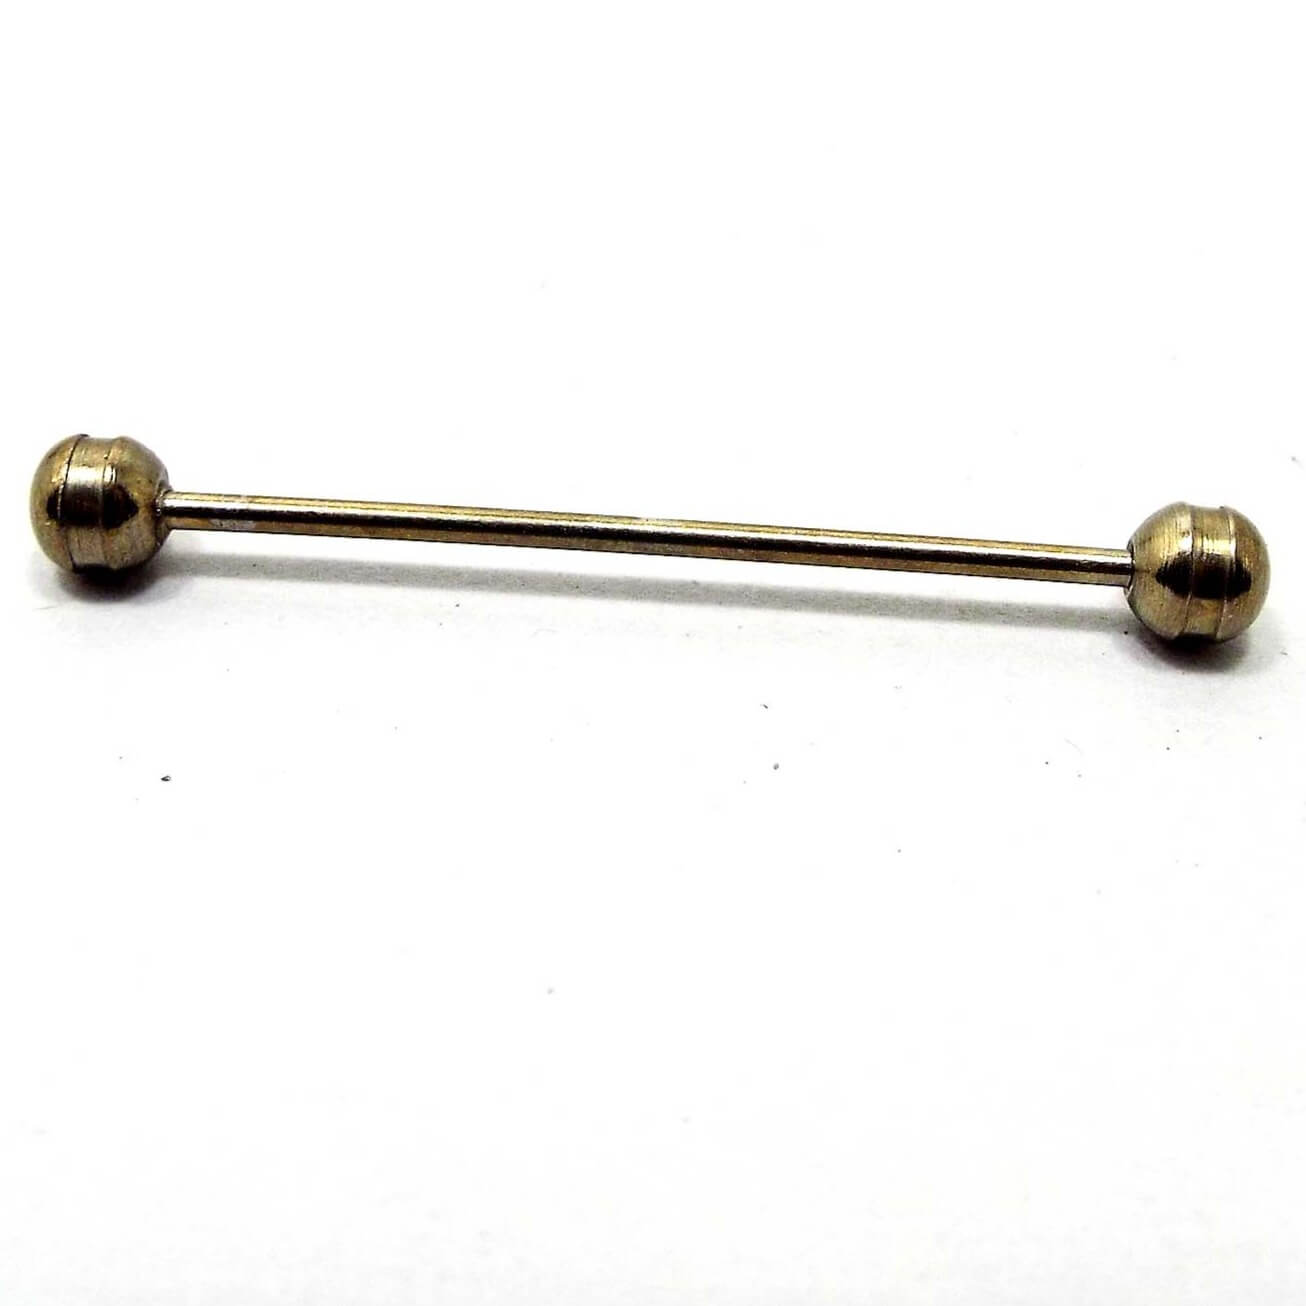 Side view of the Mid Century vintage rounded end collar bar. It is darker gold tone in color and has rounded ends with an indented cut groove on them.